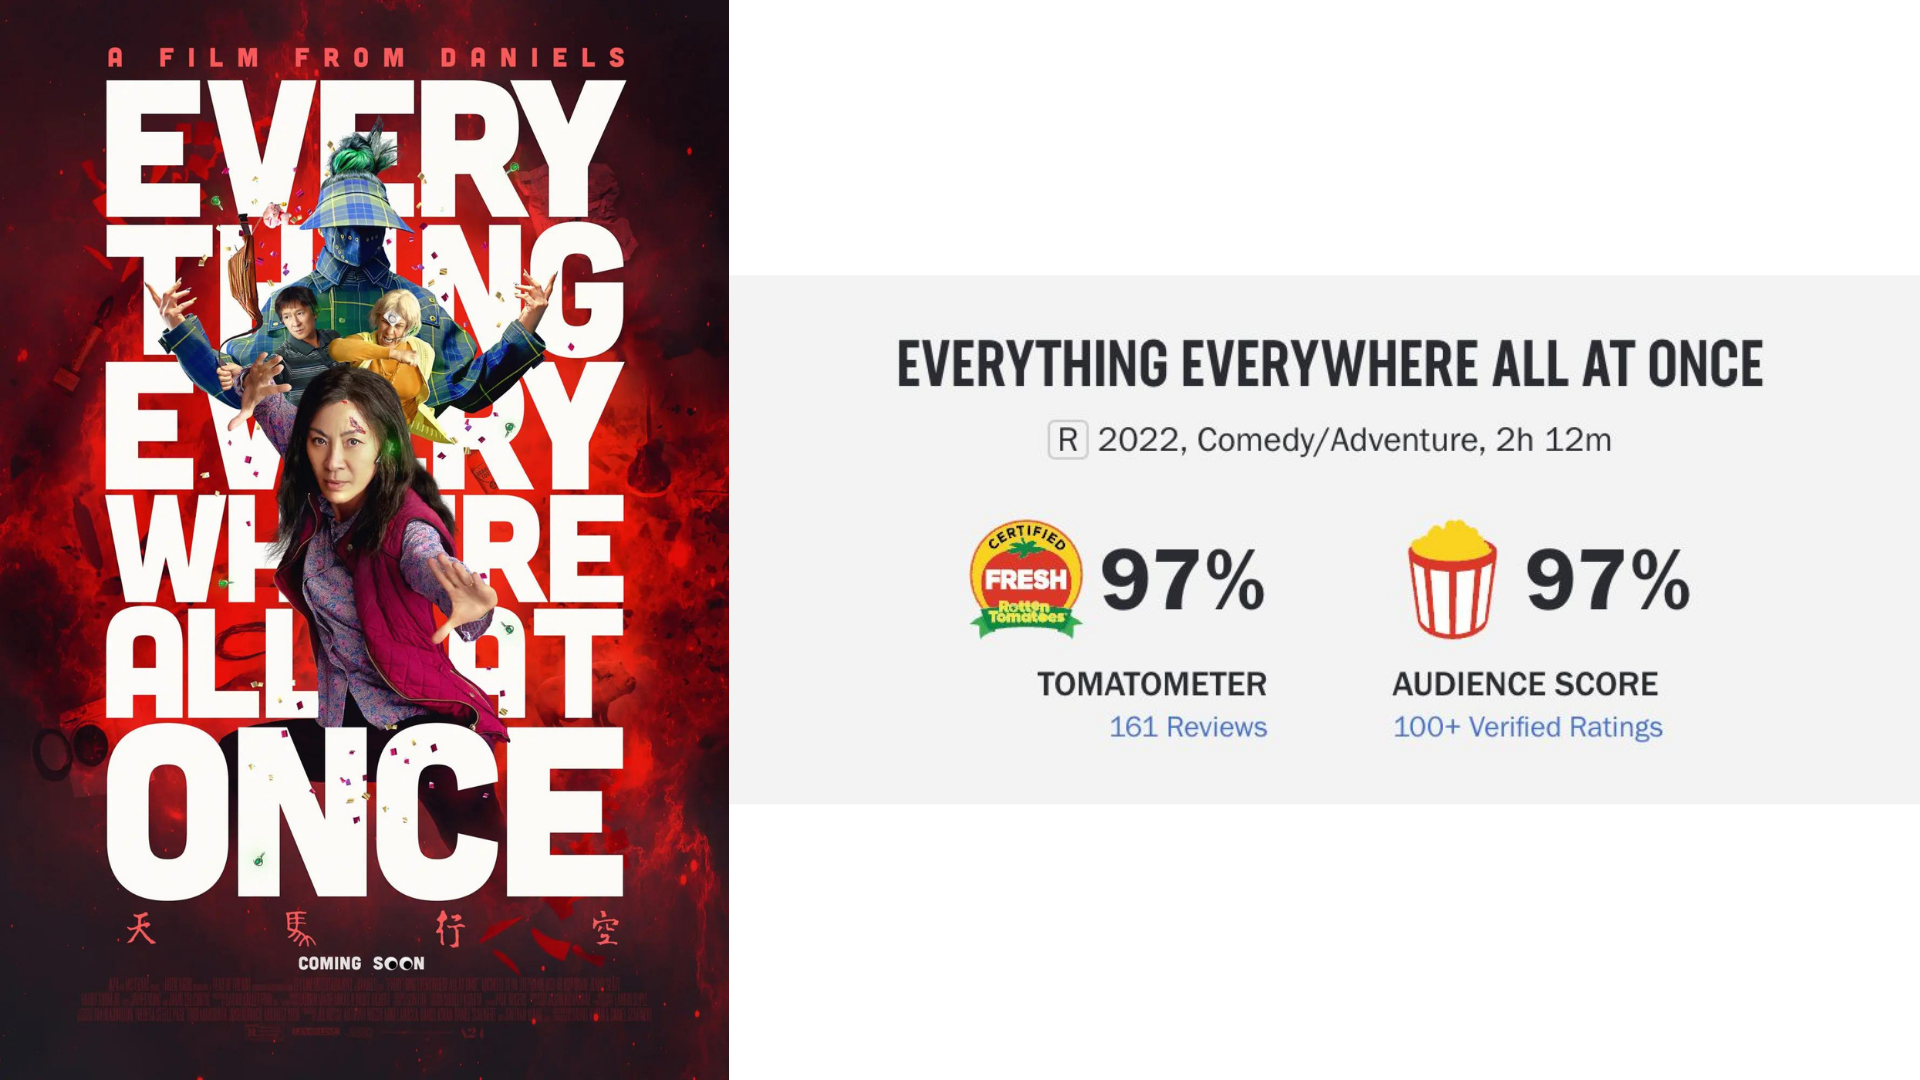 Everything Everywhere All at Once reviews on Rotten Tomatoes